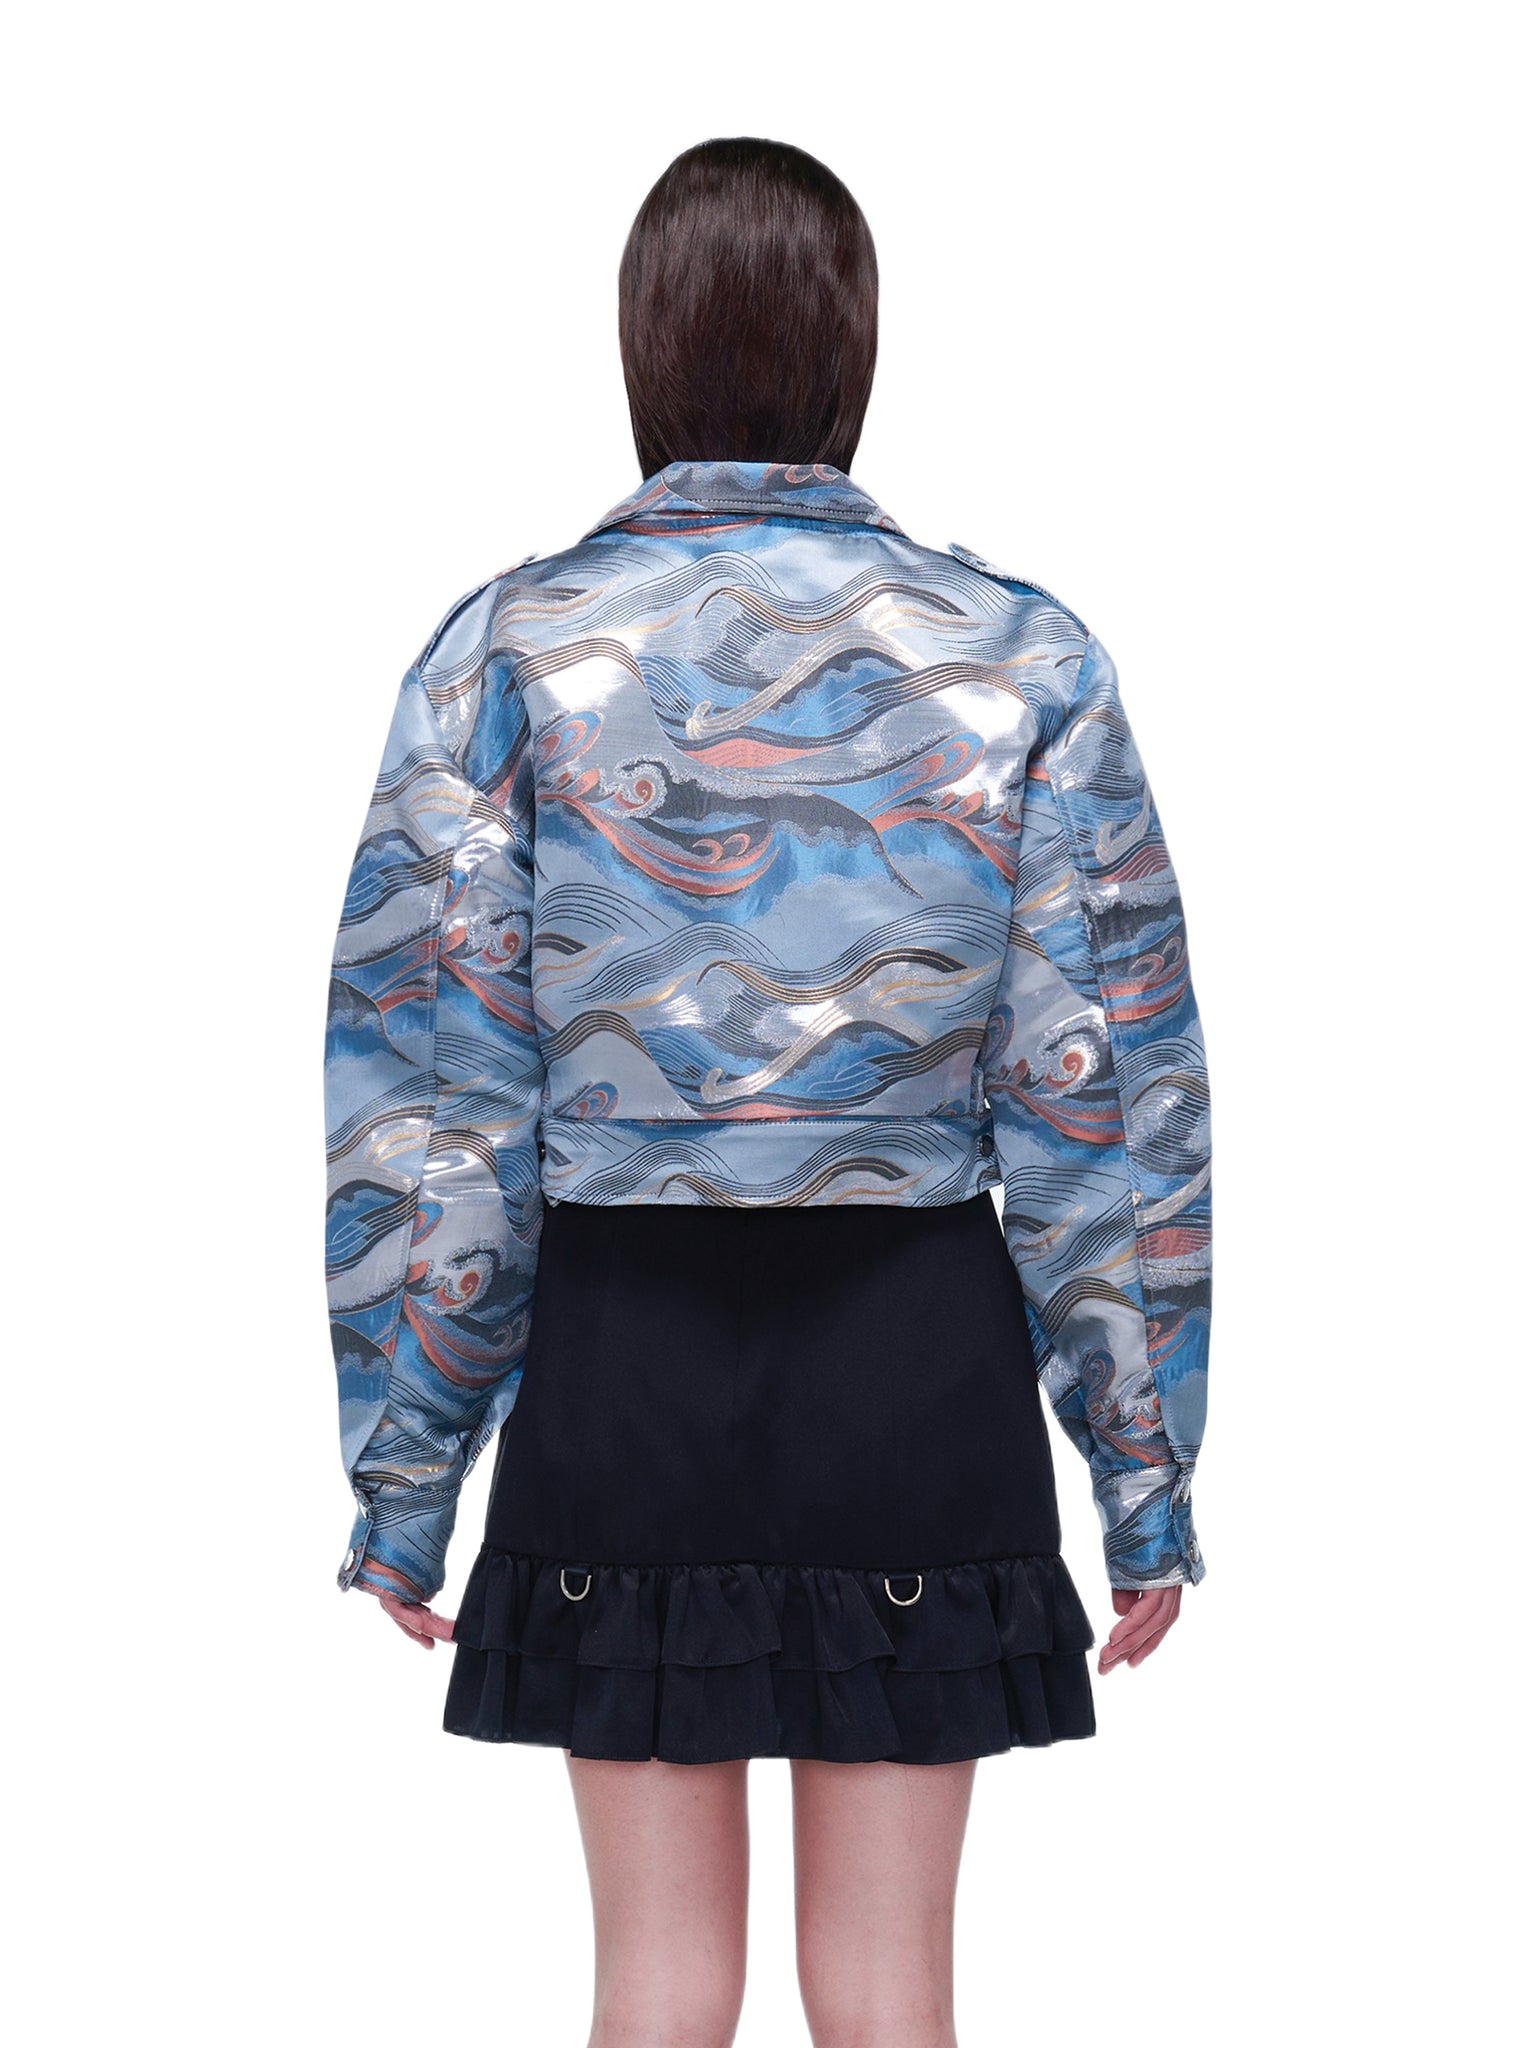 The Great Wave Jacket